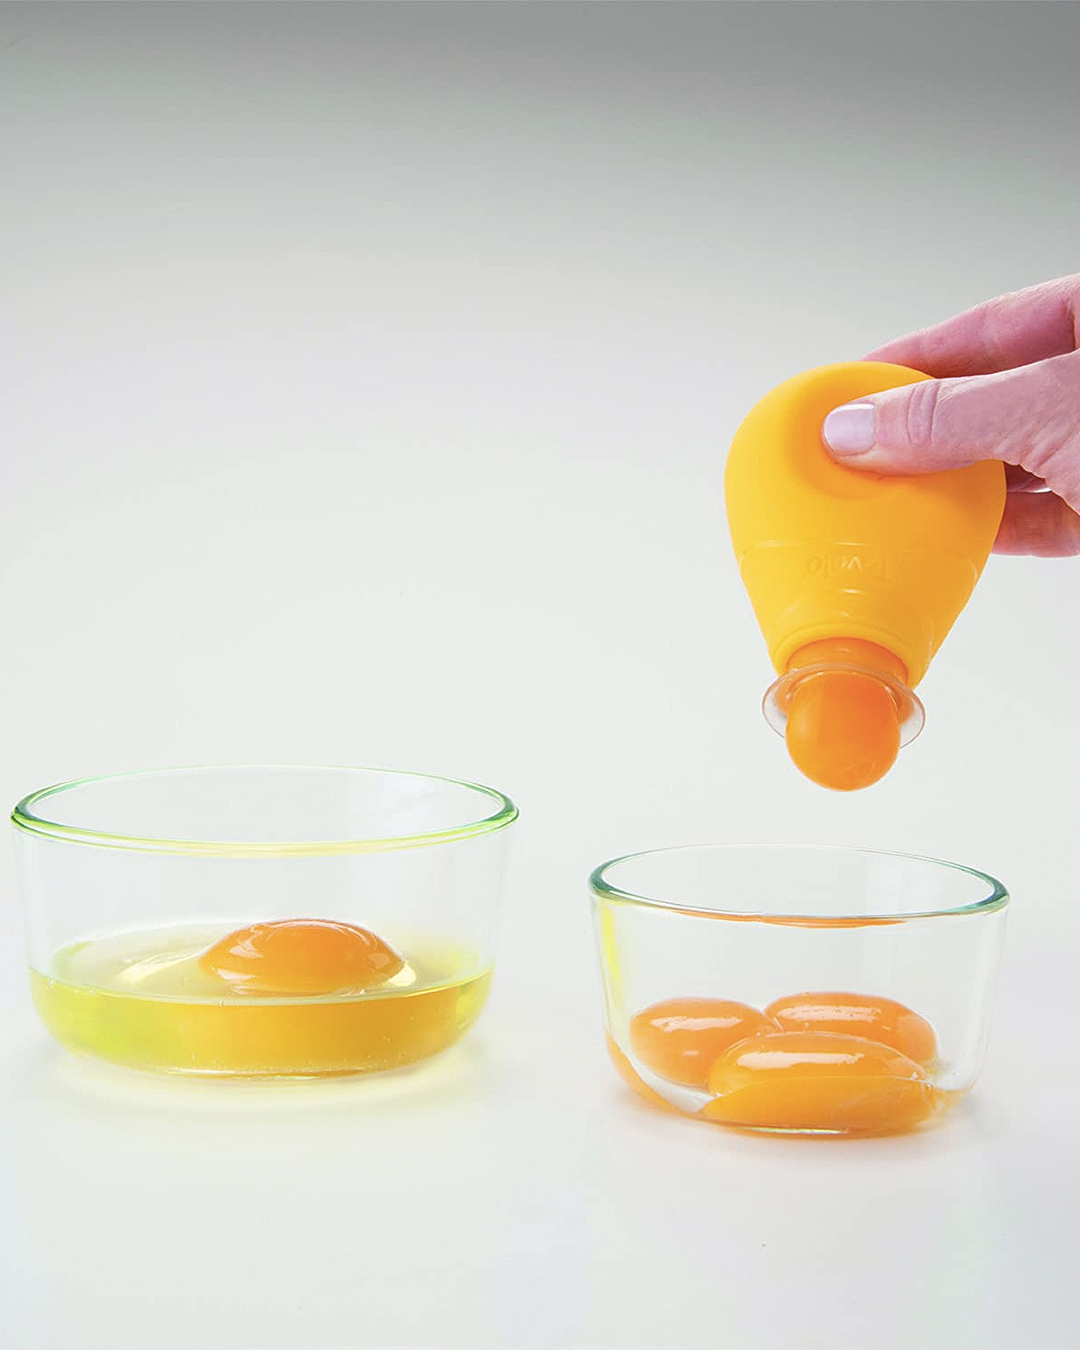 An egg separator that works by removing the yolk in tact.